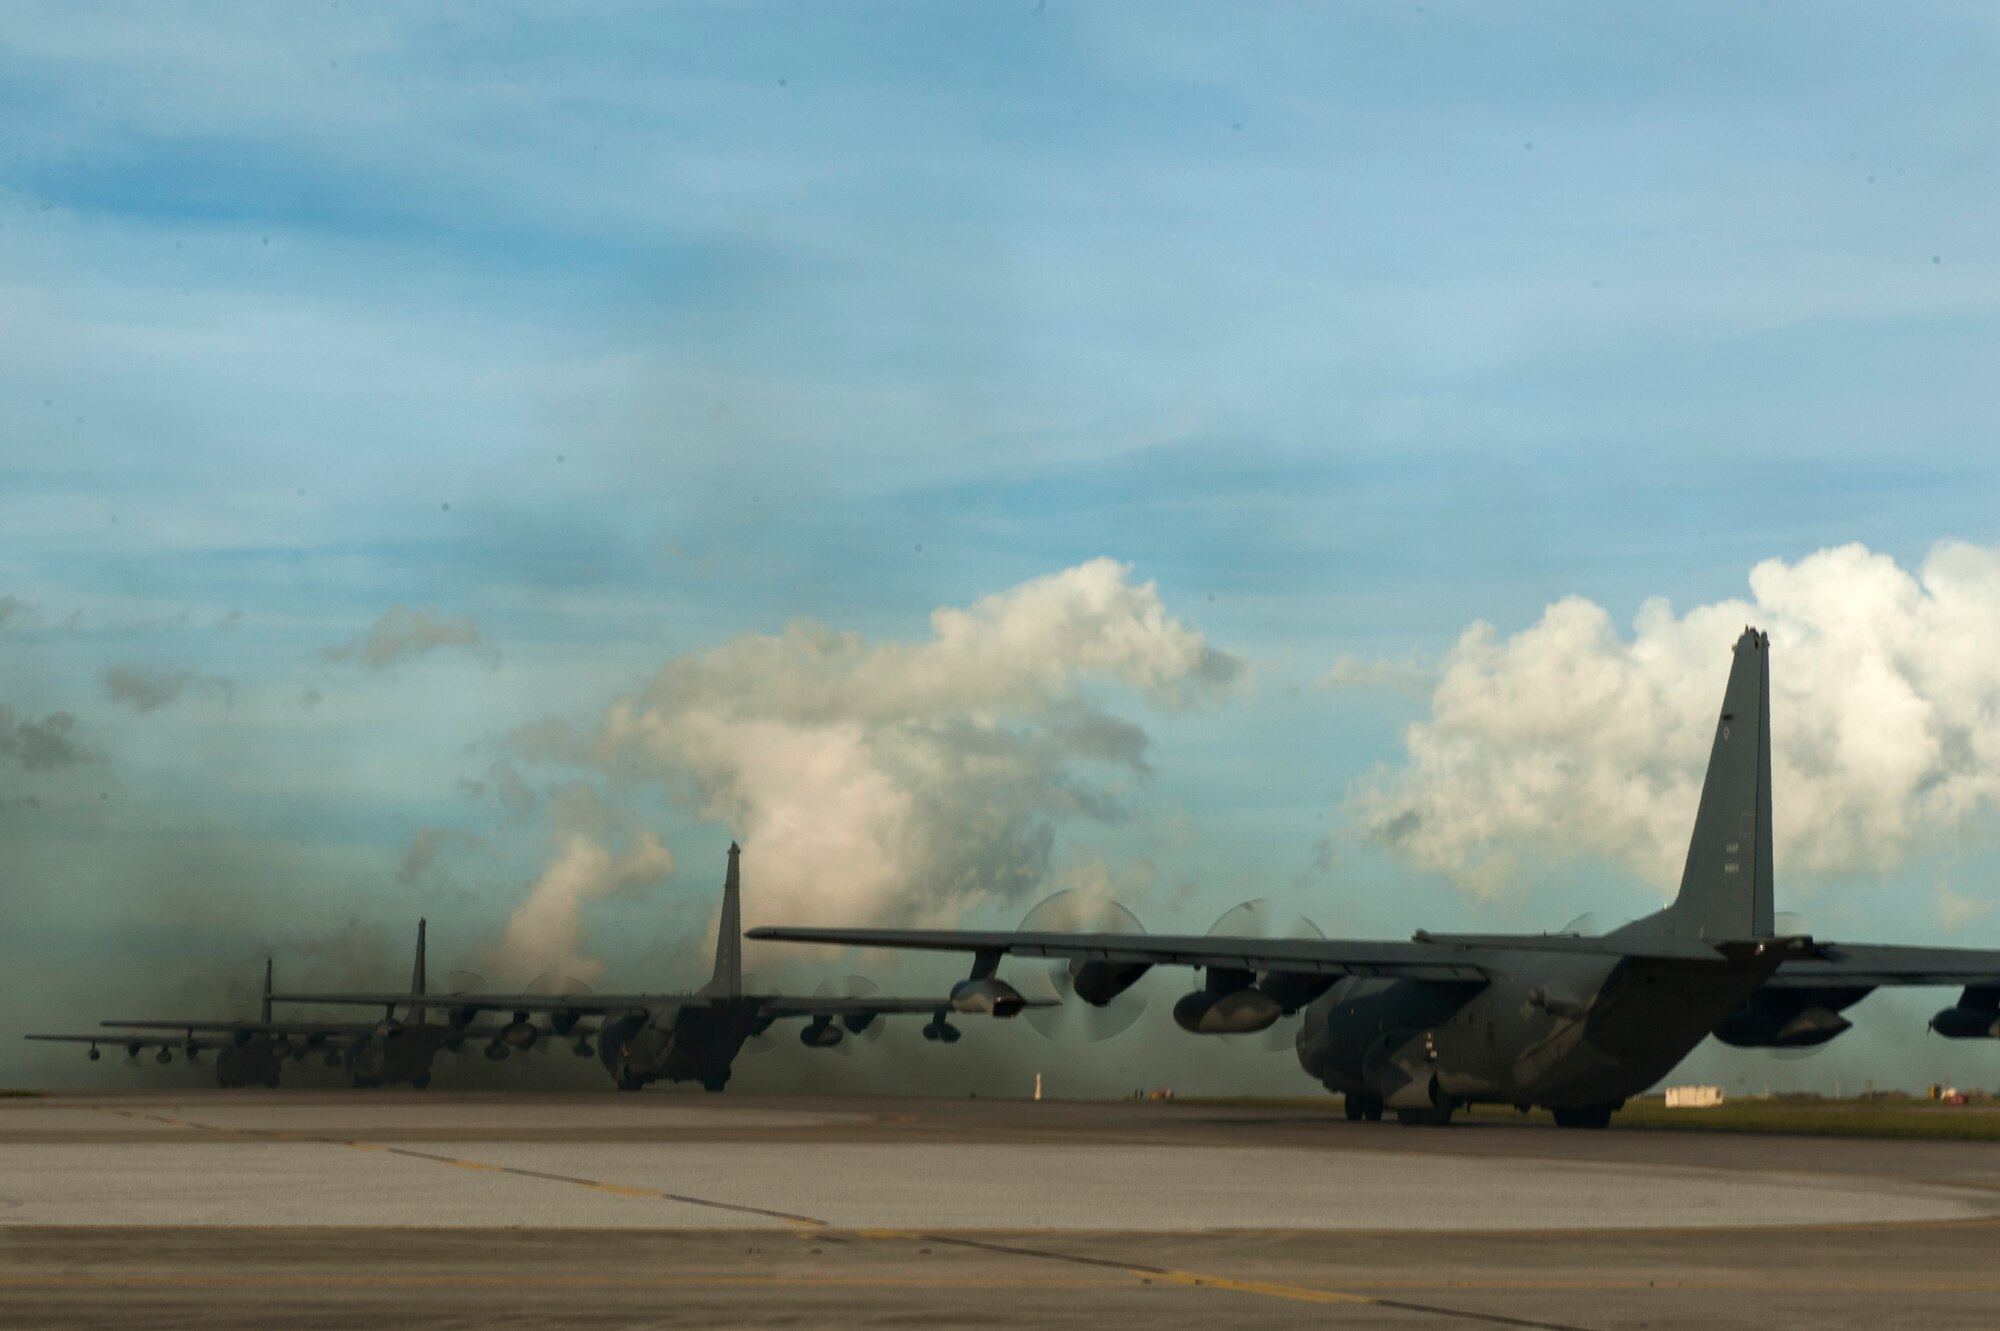 Four U.S. Air Force MC-130H Combat Talon IIs from the 1st Special Operations Squadron taxi in line on the Kadena Air Base, Japan, flightline May 14, 2015.  The 1st Special Operations Squadron operates the MC-130H providing infiltration, exfiltration, and resupply of special operations forces and equipment in hostile or denied territory.  By conducting formation flight, aircrews and maintainers test and validate their ability to efficiently generate aircraft and to quickly infiltrate and exfiltrate large numbers of ground forces.  (U.S. Air Force photo by Senior Airman Stephen G. Eigel)